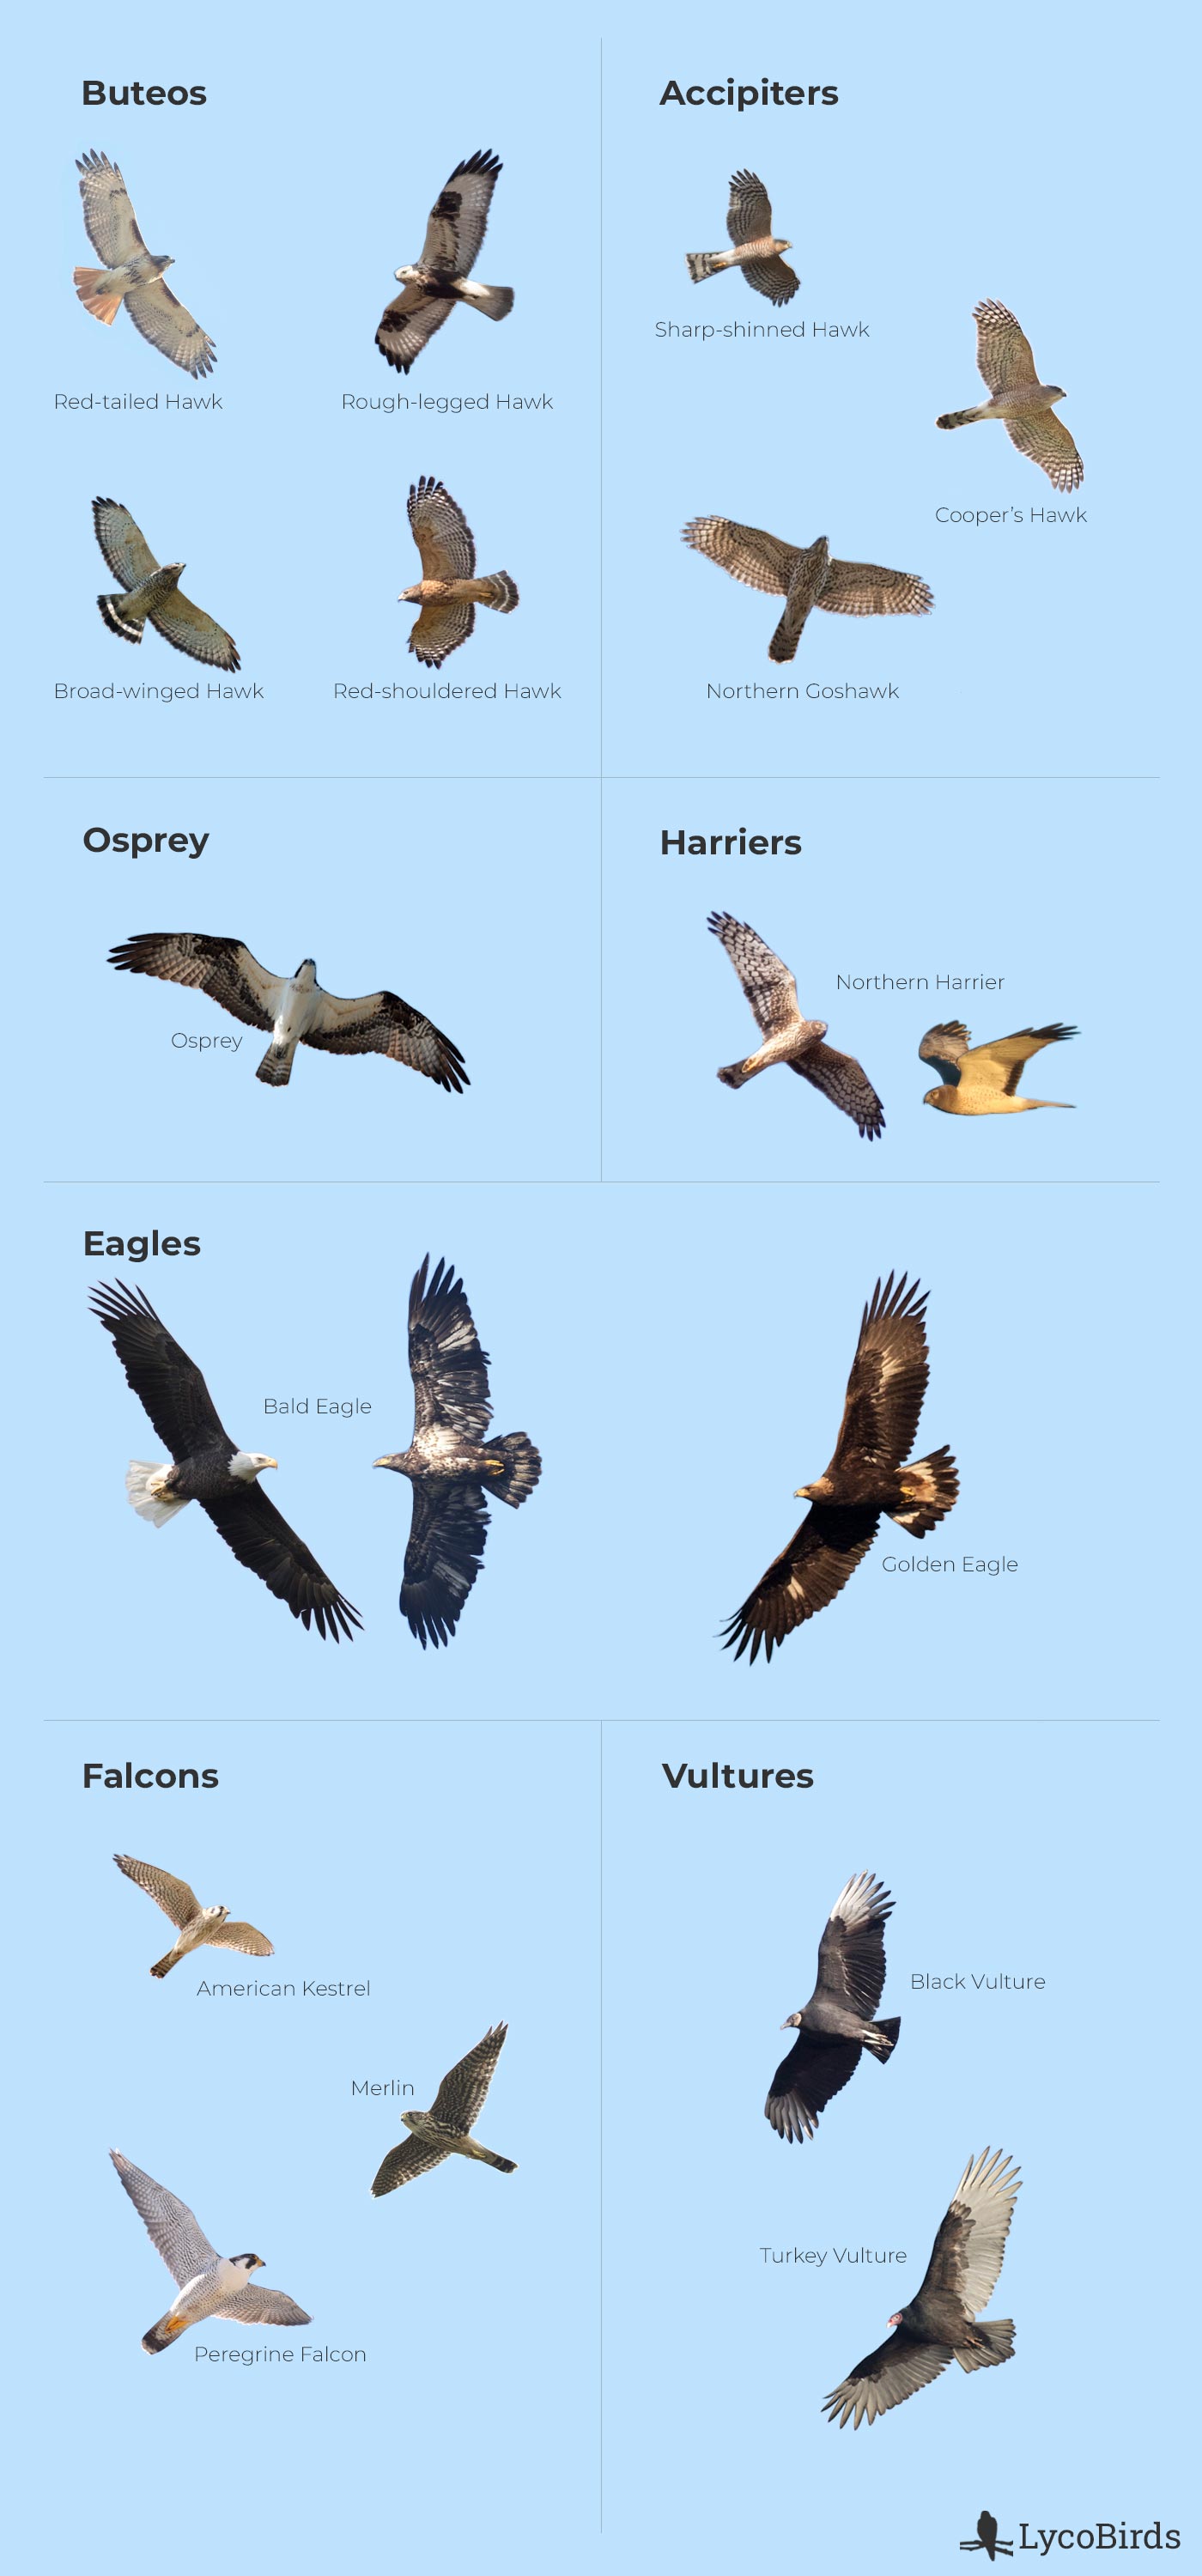 Raptor Family Comparison Chart: Buteos, Accipiters, Osprey, Harriers, Eagles, Falcons, and Vultures